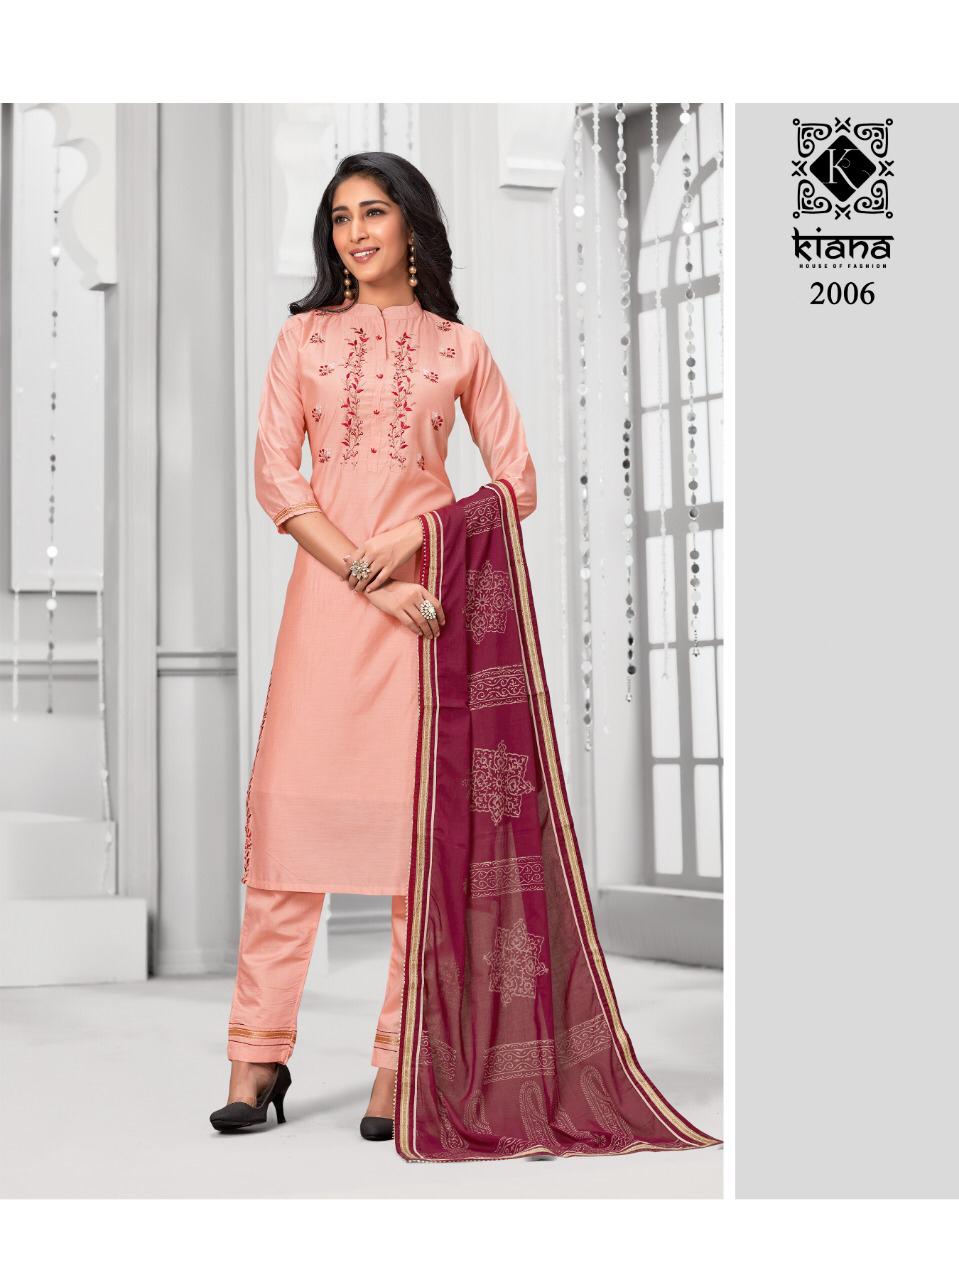 Crystal Vol 2 By Kiana Chanderi Silk Rayon Top With Sharara Pant Plazzo And Dupatta Readymade Collection In Wholesale Price